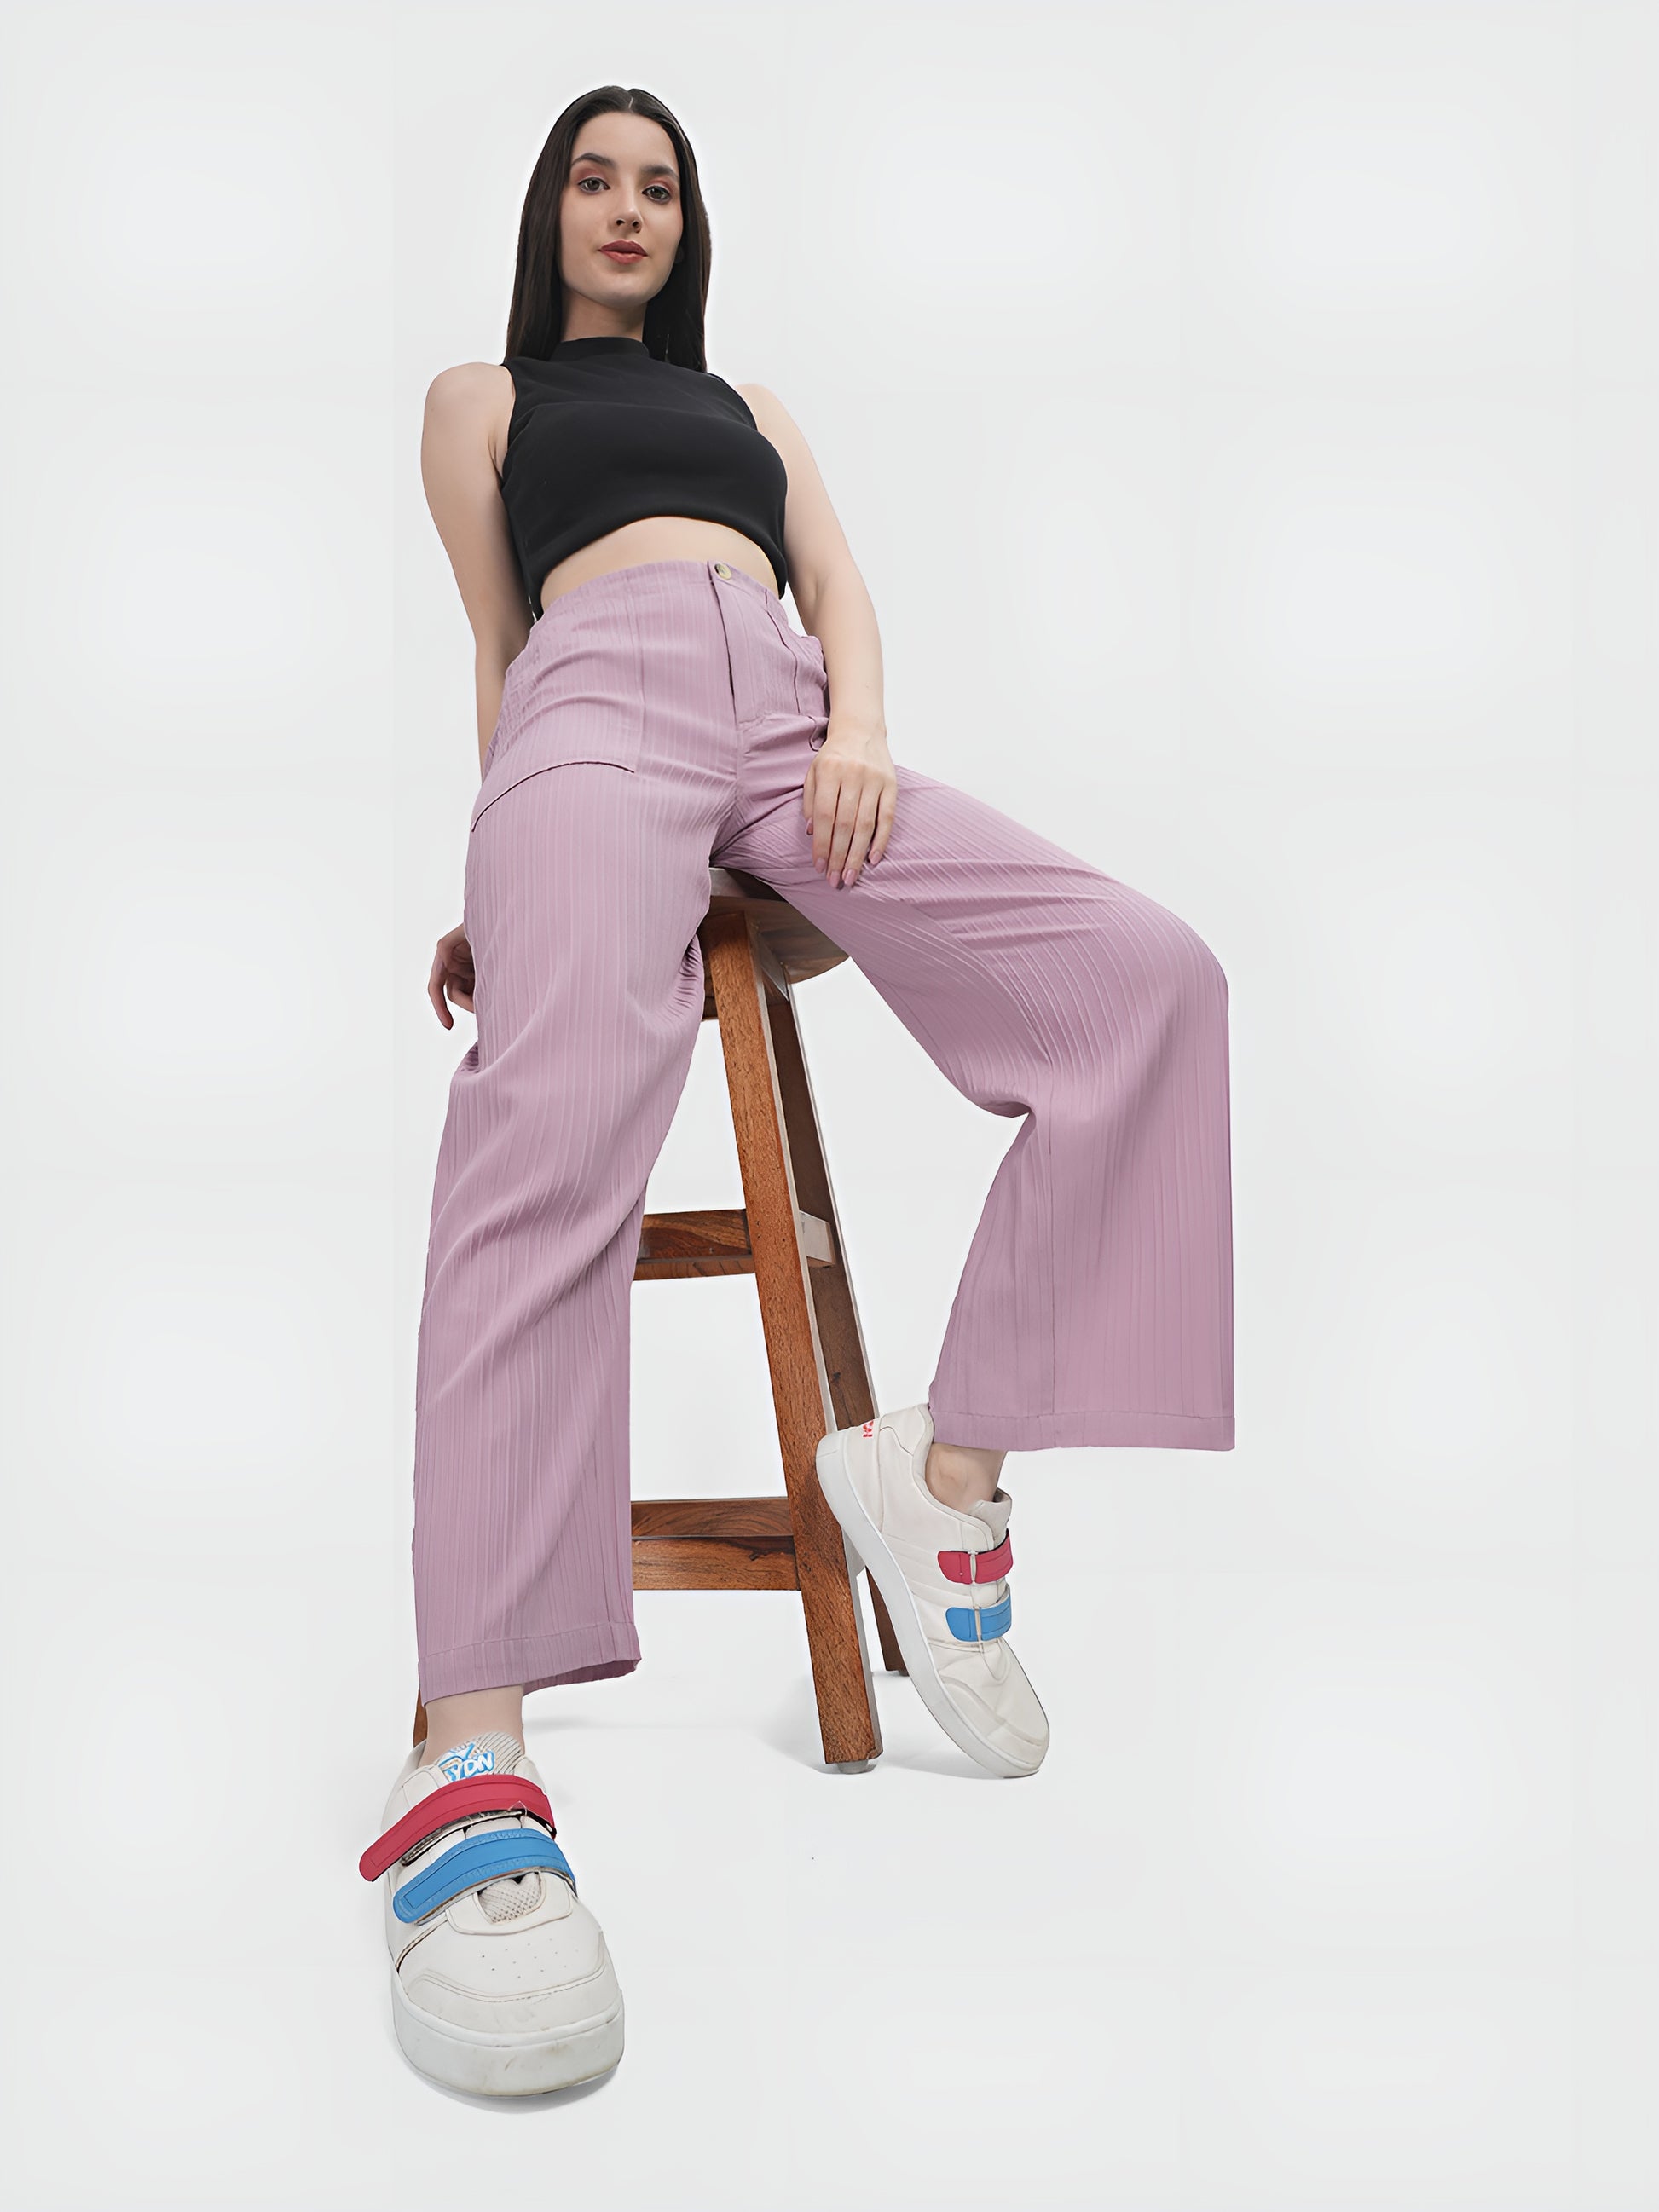 Lilac  Colour | Women Formal Trousers Regular Fit Being Flawless